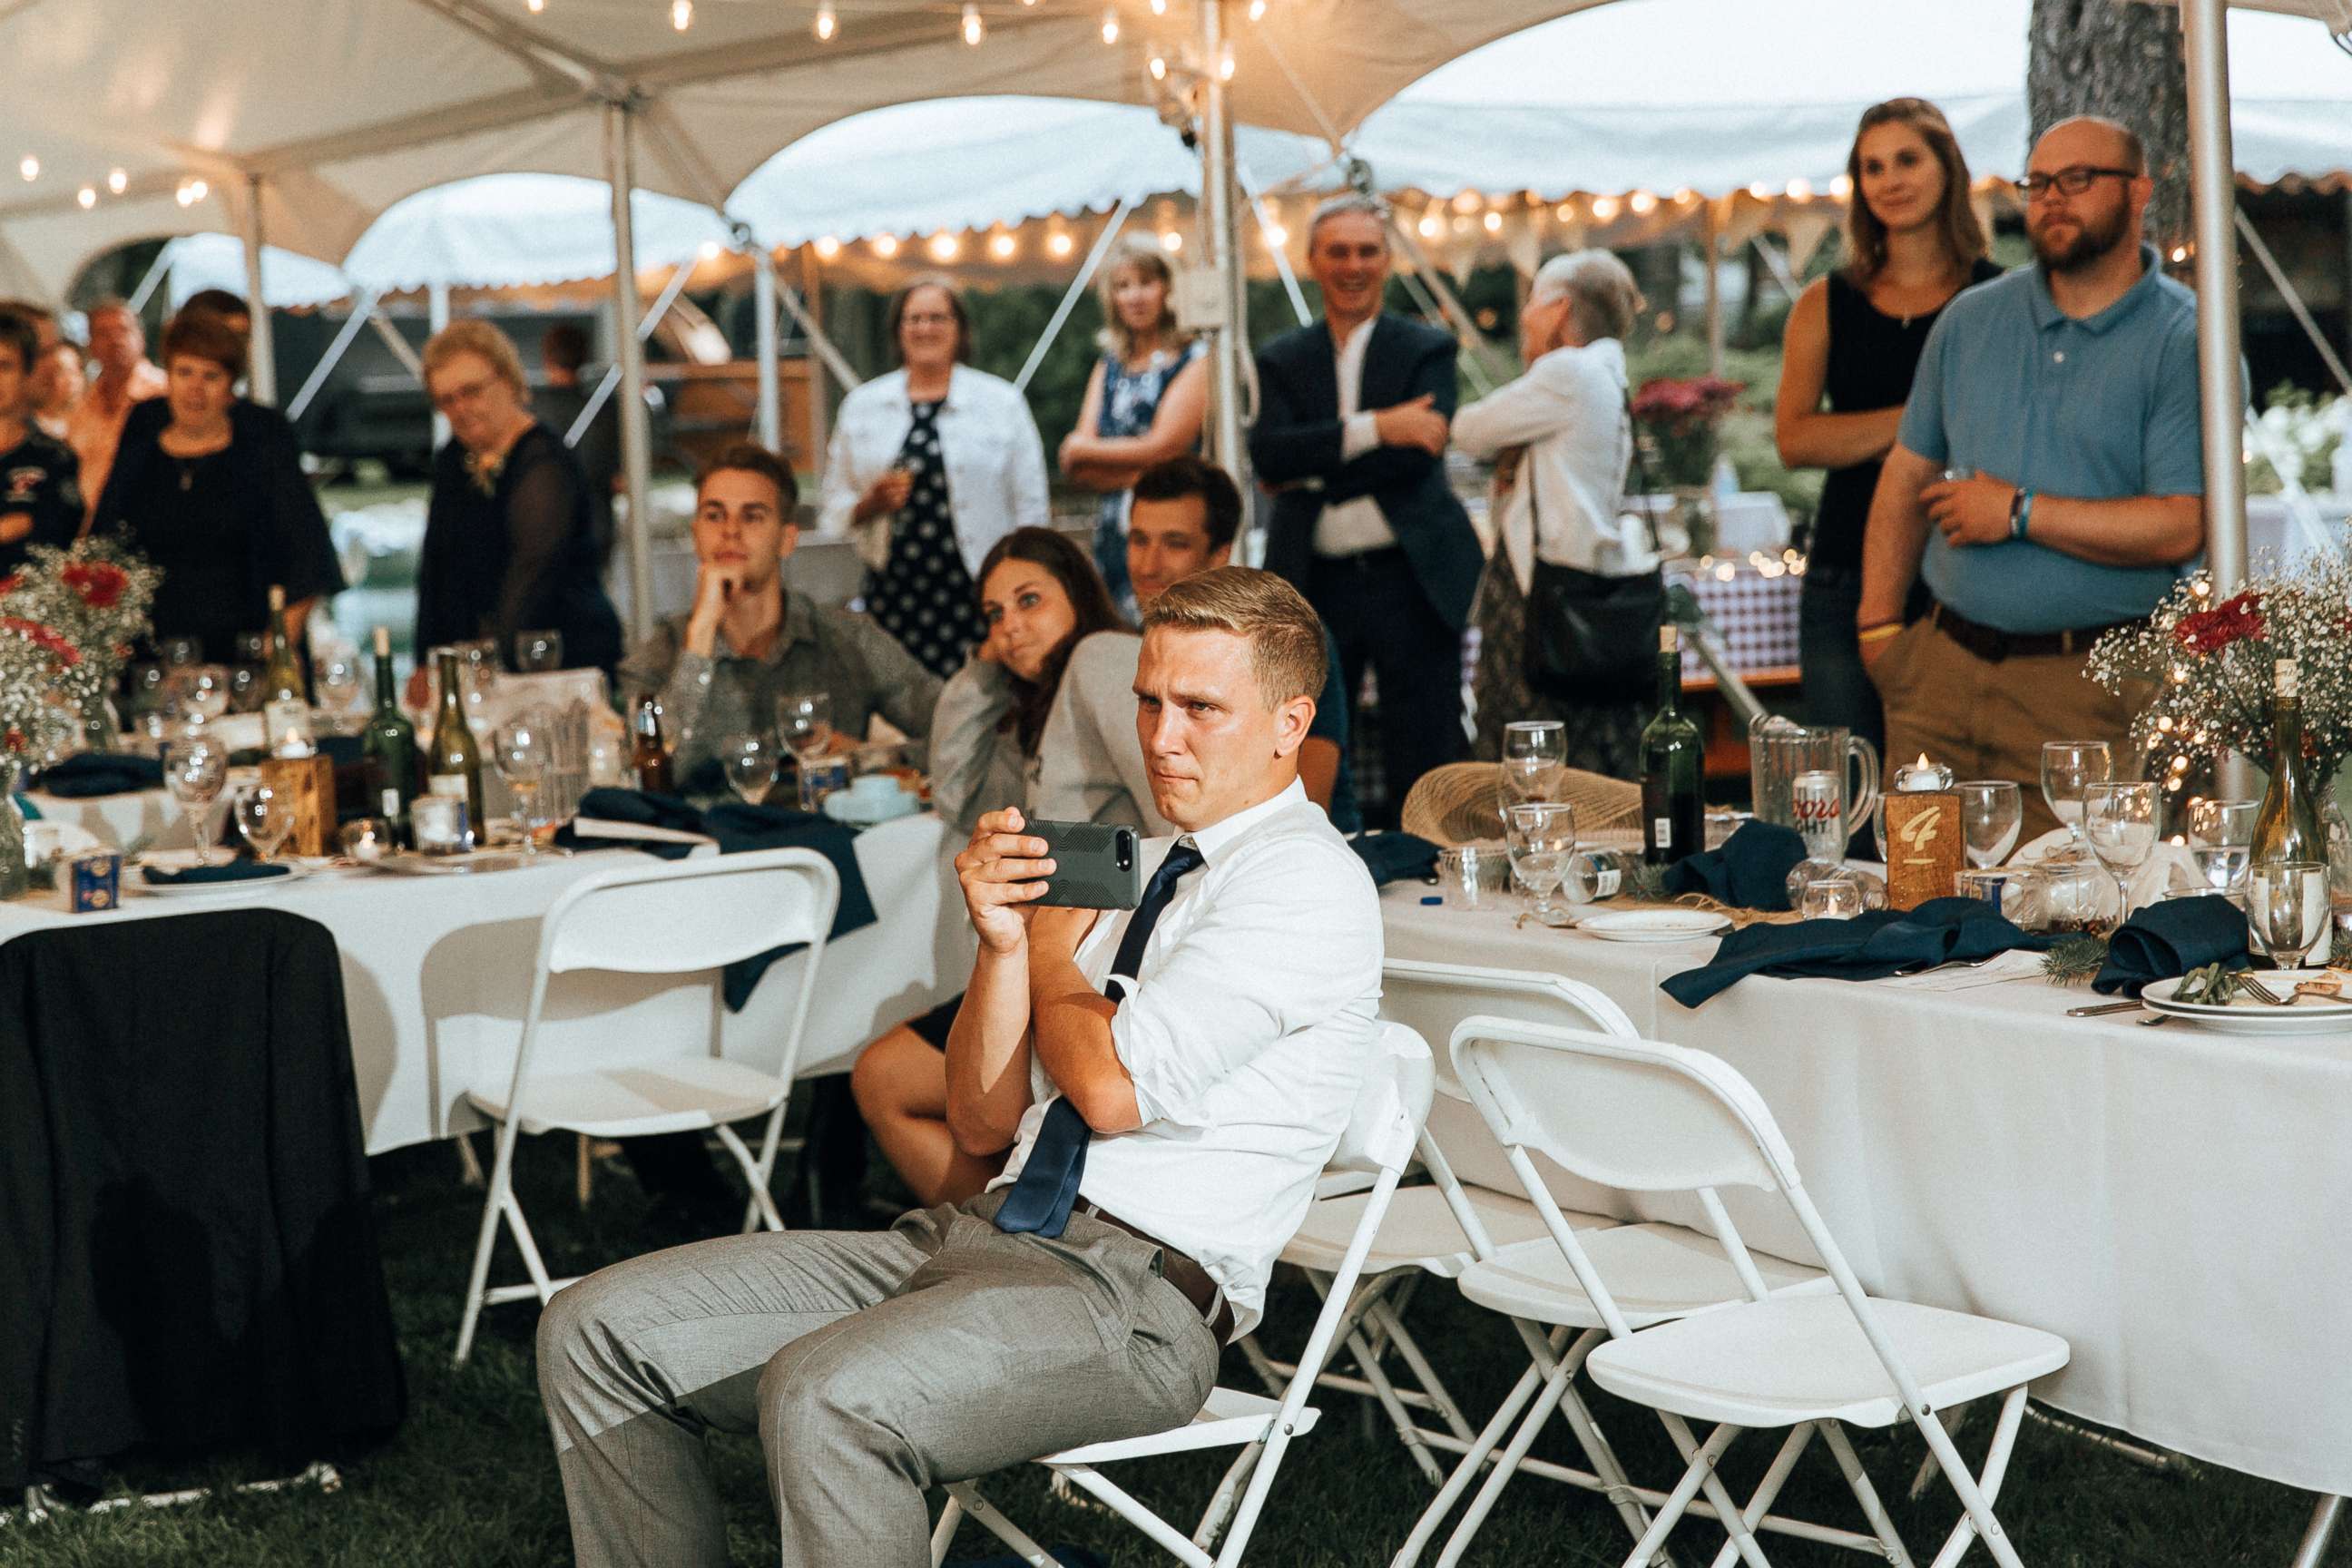 PHOTO: Zak Fick couldn't contain his emotions watching his sister dance with their father after her Aug. 5 wedding in Pequot Lakes, Minnesota.